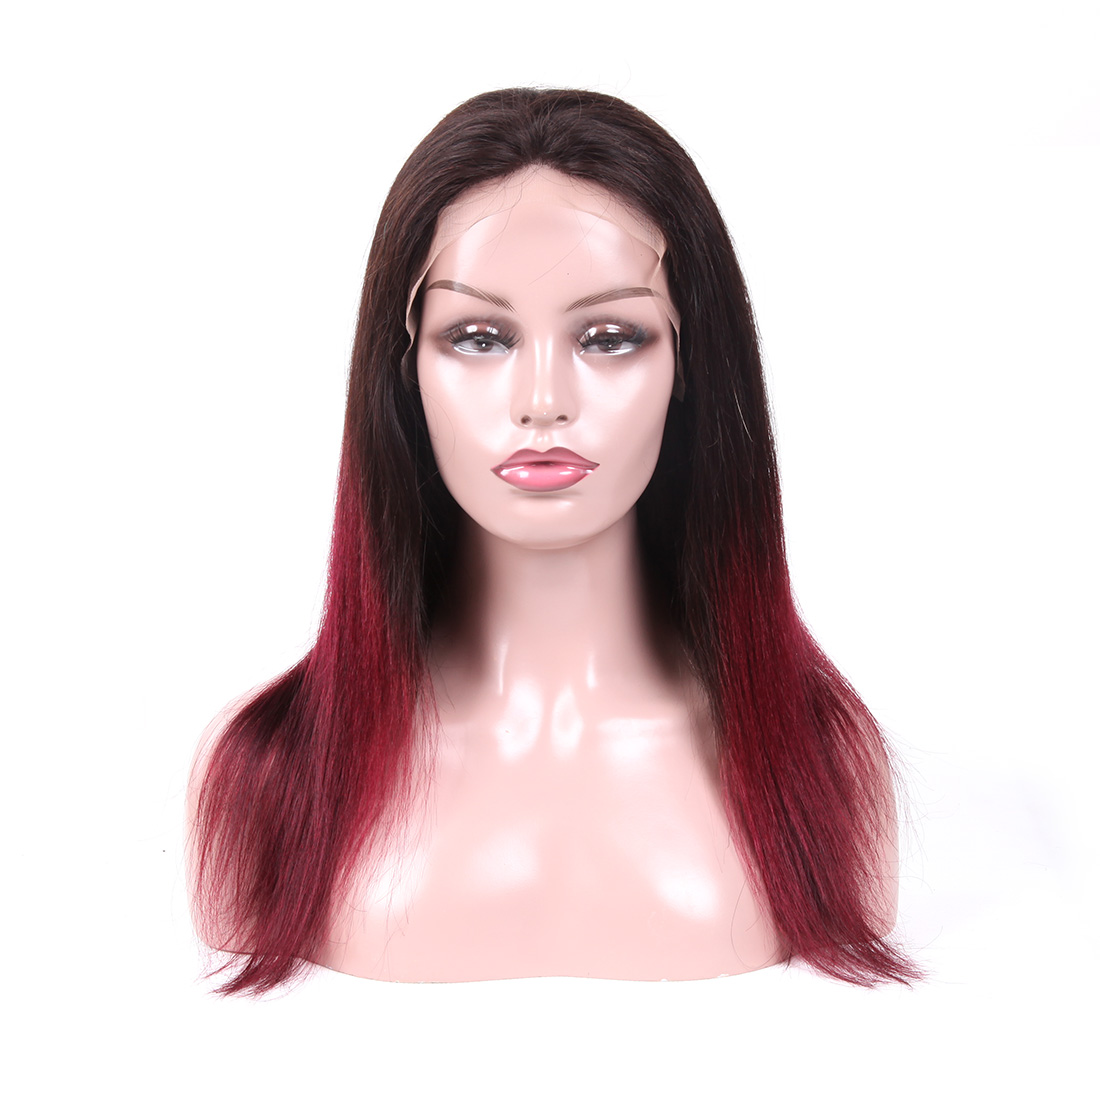 Alibaba best sellers woman wig,high 130 density full lace wig with shedding free,alibaba lace wig china